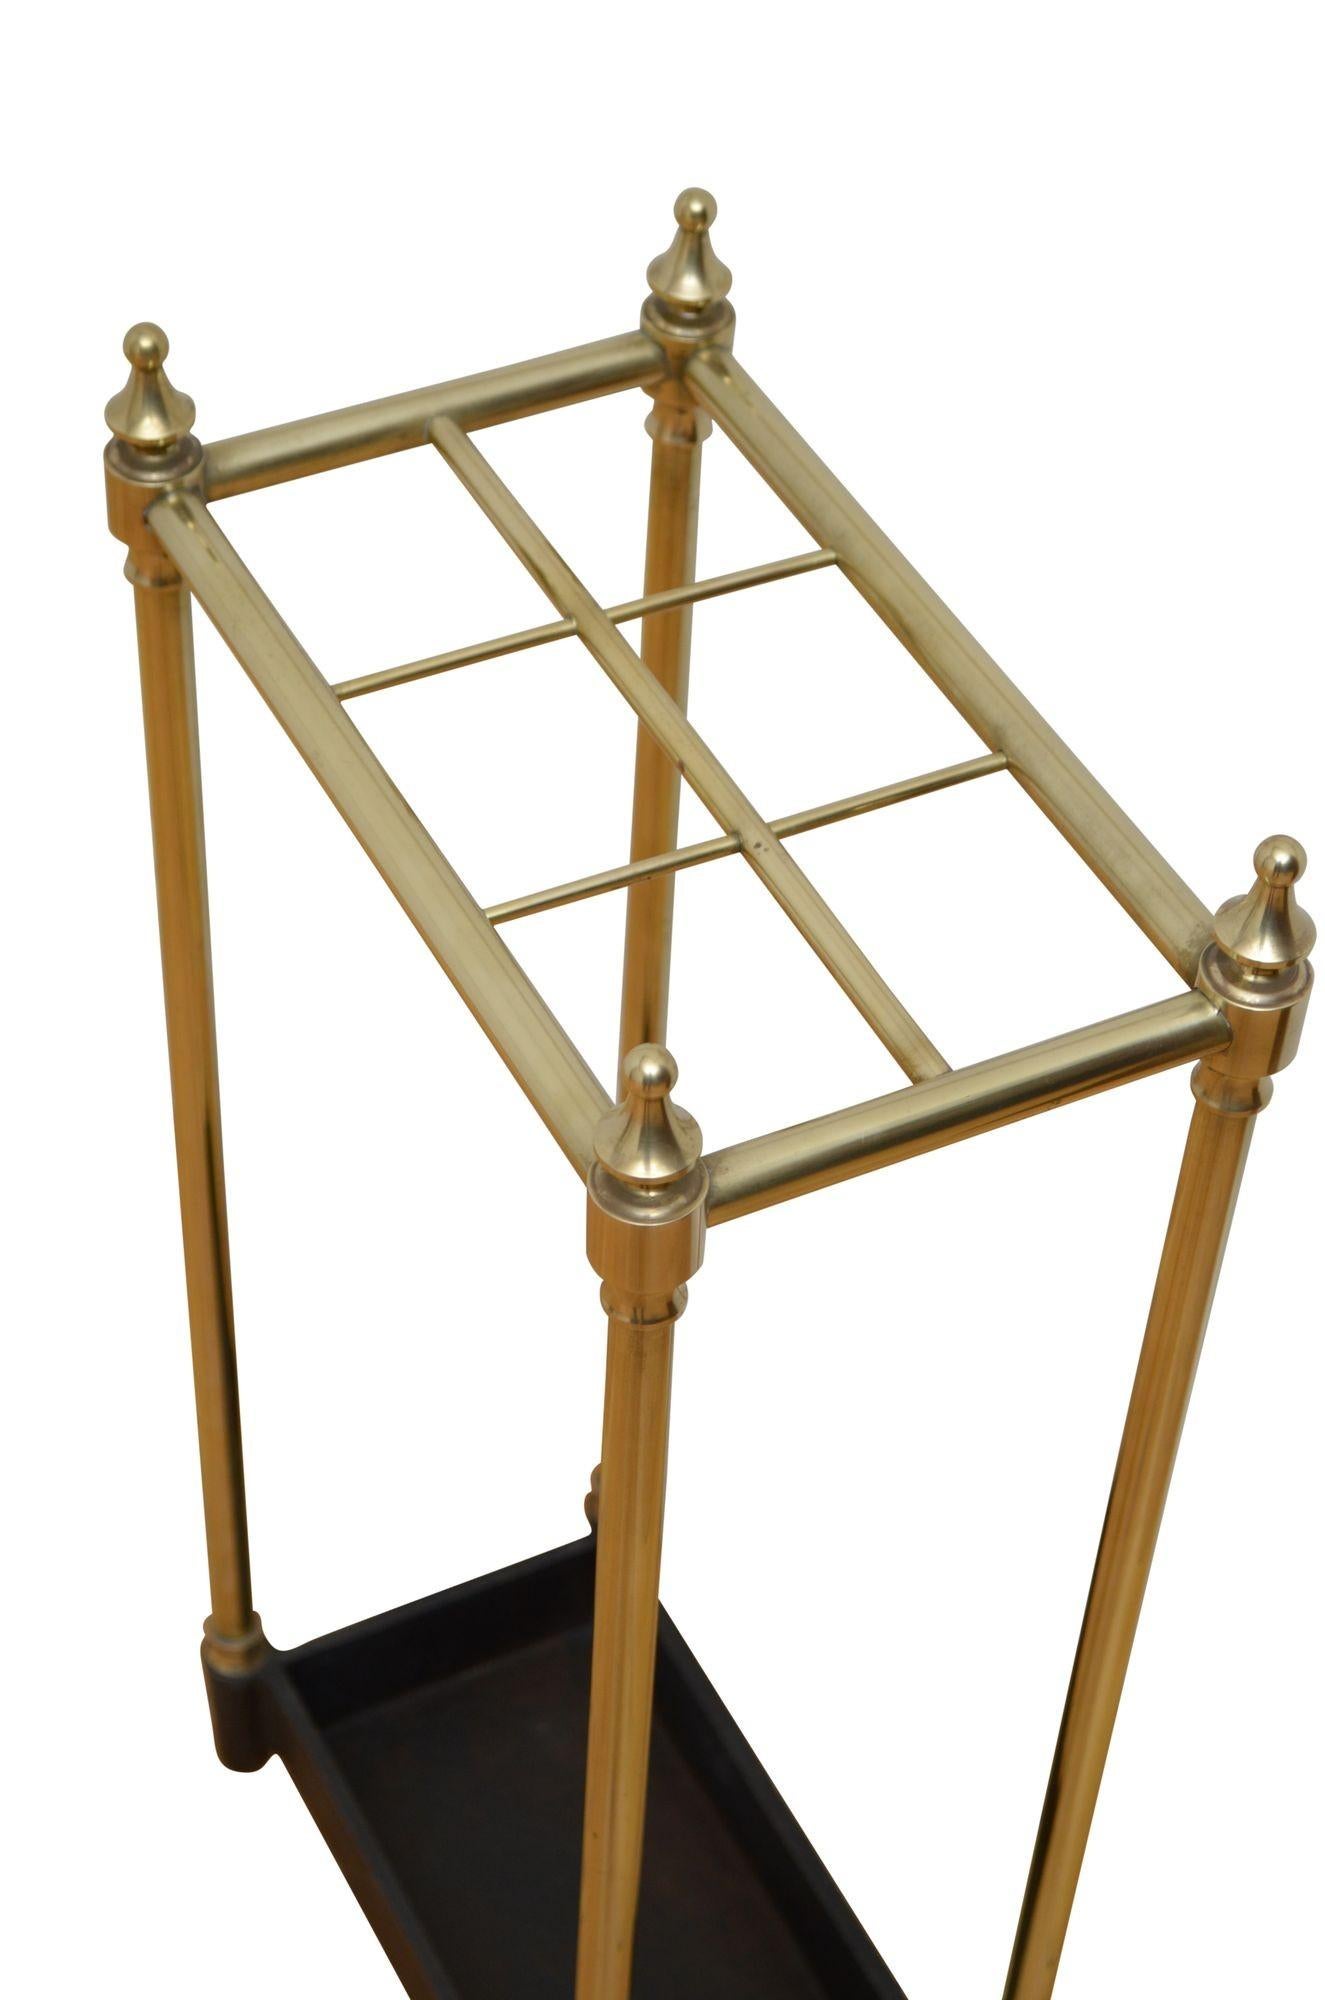 P0257 Edwardian umbrella stand with six divisions, decorative finials and cast iron drip tray. This antique umbrella stand has been cleaned and polished and is in home ready condition. c1900
UK mainland delivery included.
H25.5